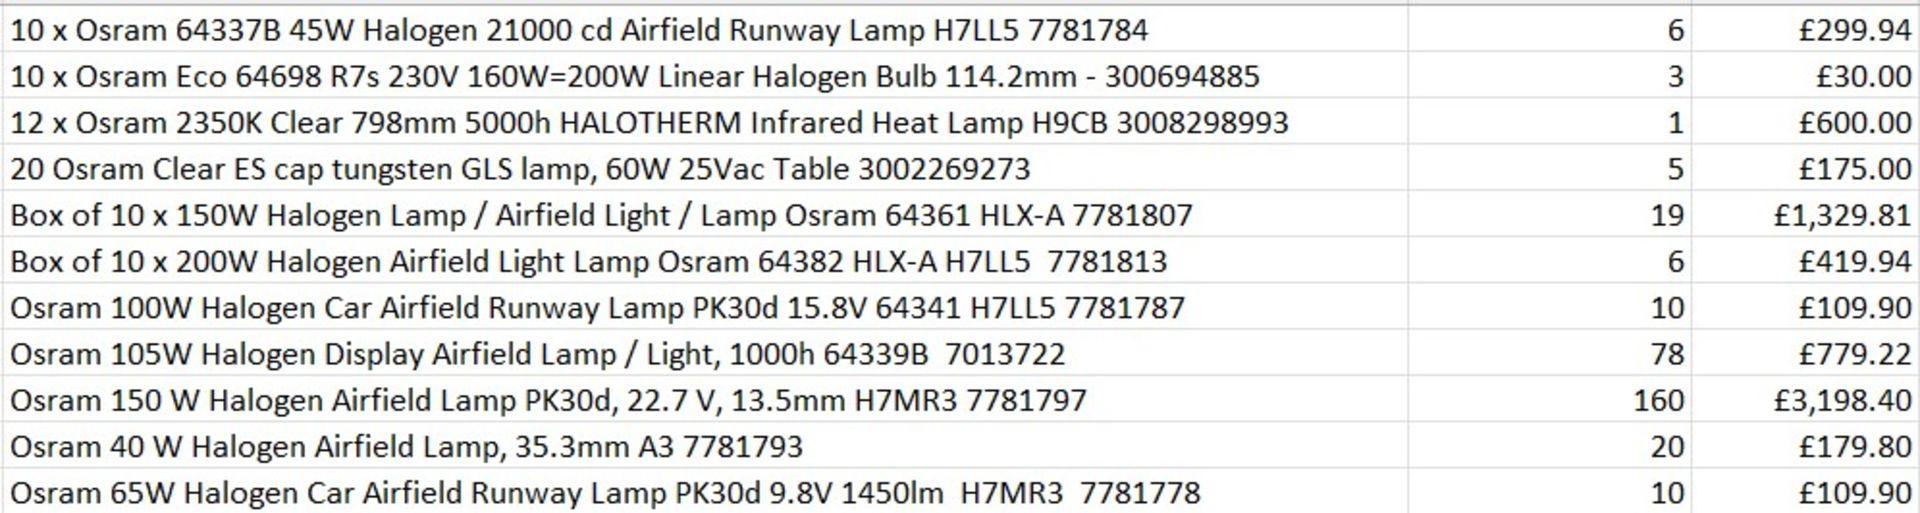 £7k worth of Osram items across 11 products - halogen lamps